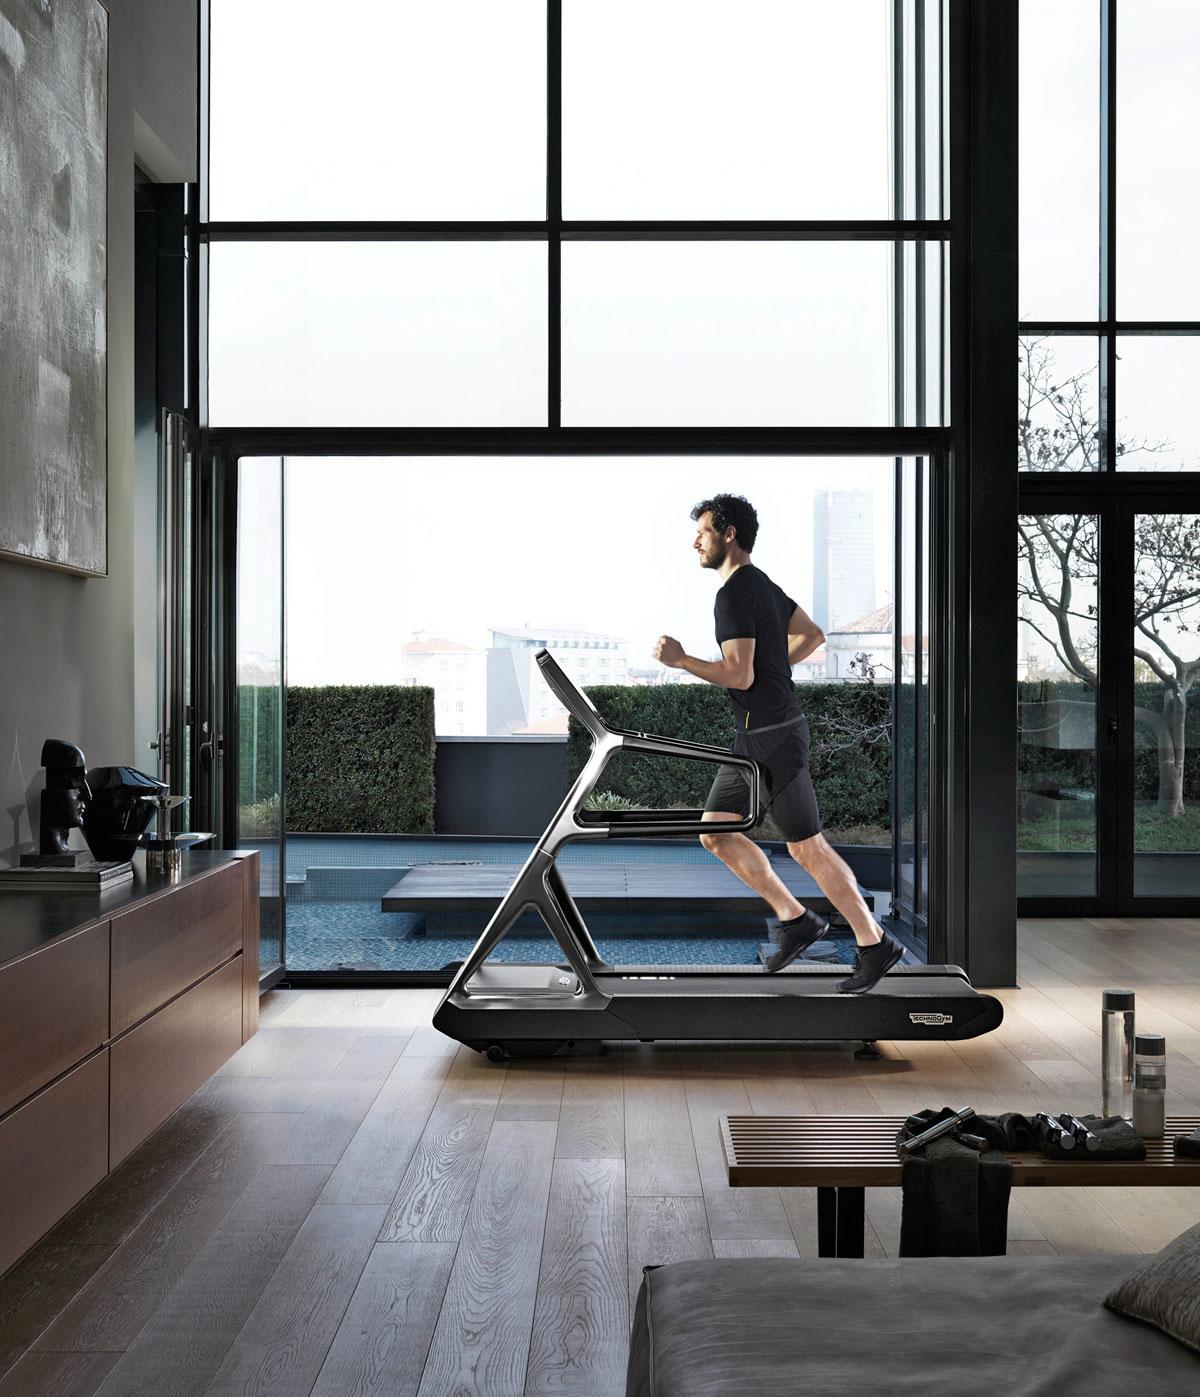 Antonio Citterio worked closely with Technogym to design the Personal range